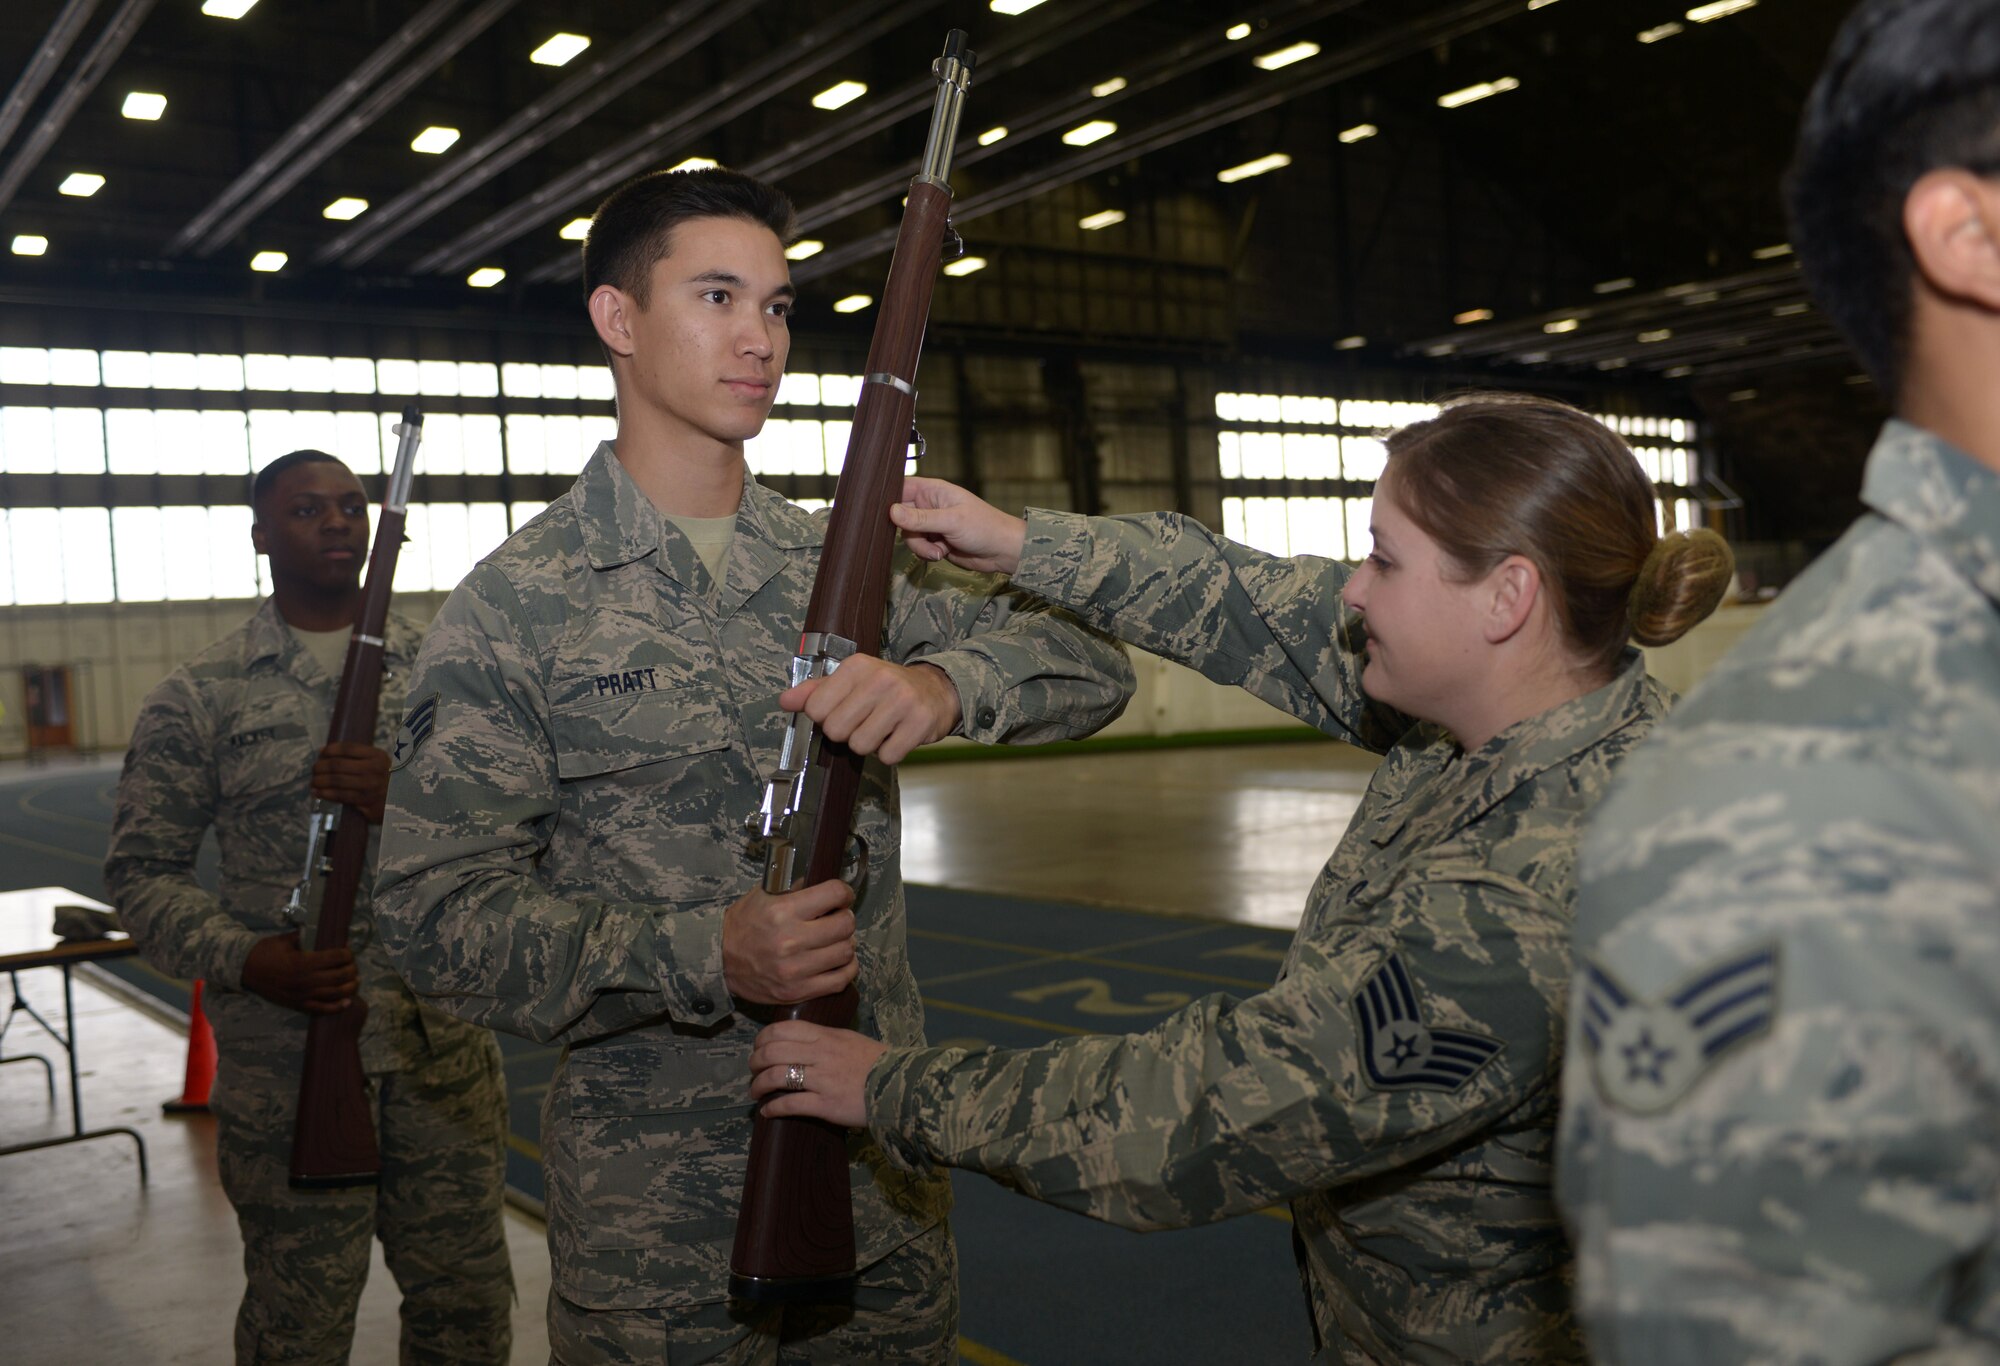 Staff Sgt. Michelle Hoyal, an honor guard flight sergeant assigned to the 28th Force Support Squadron, adjusts Senior Airman James Pratt, an equipment operator assigned to the 28th Civil Engineer Squadron, during rifle drill at Ellsworth Air Force Base, S.D., Dec. 2, 2016. The mission the Ellsworth Honor Guard is to act as representatives for Airmen to both the American public and the world (U.S. Air Force photo by Airman 1st Class Donald C. Knechtel)